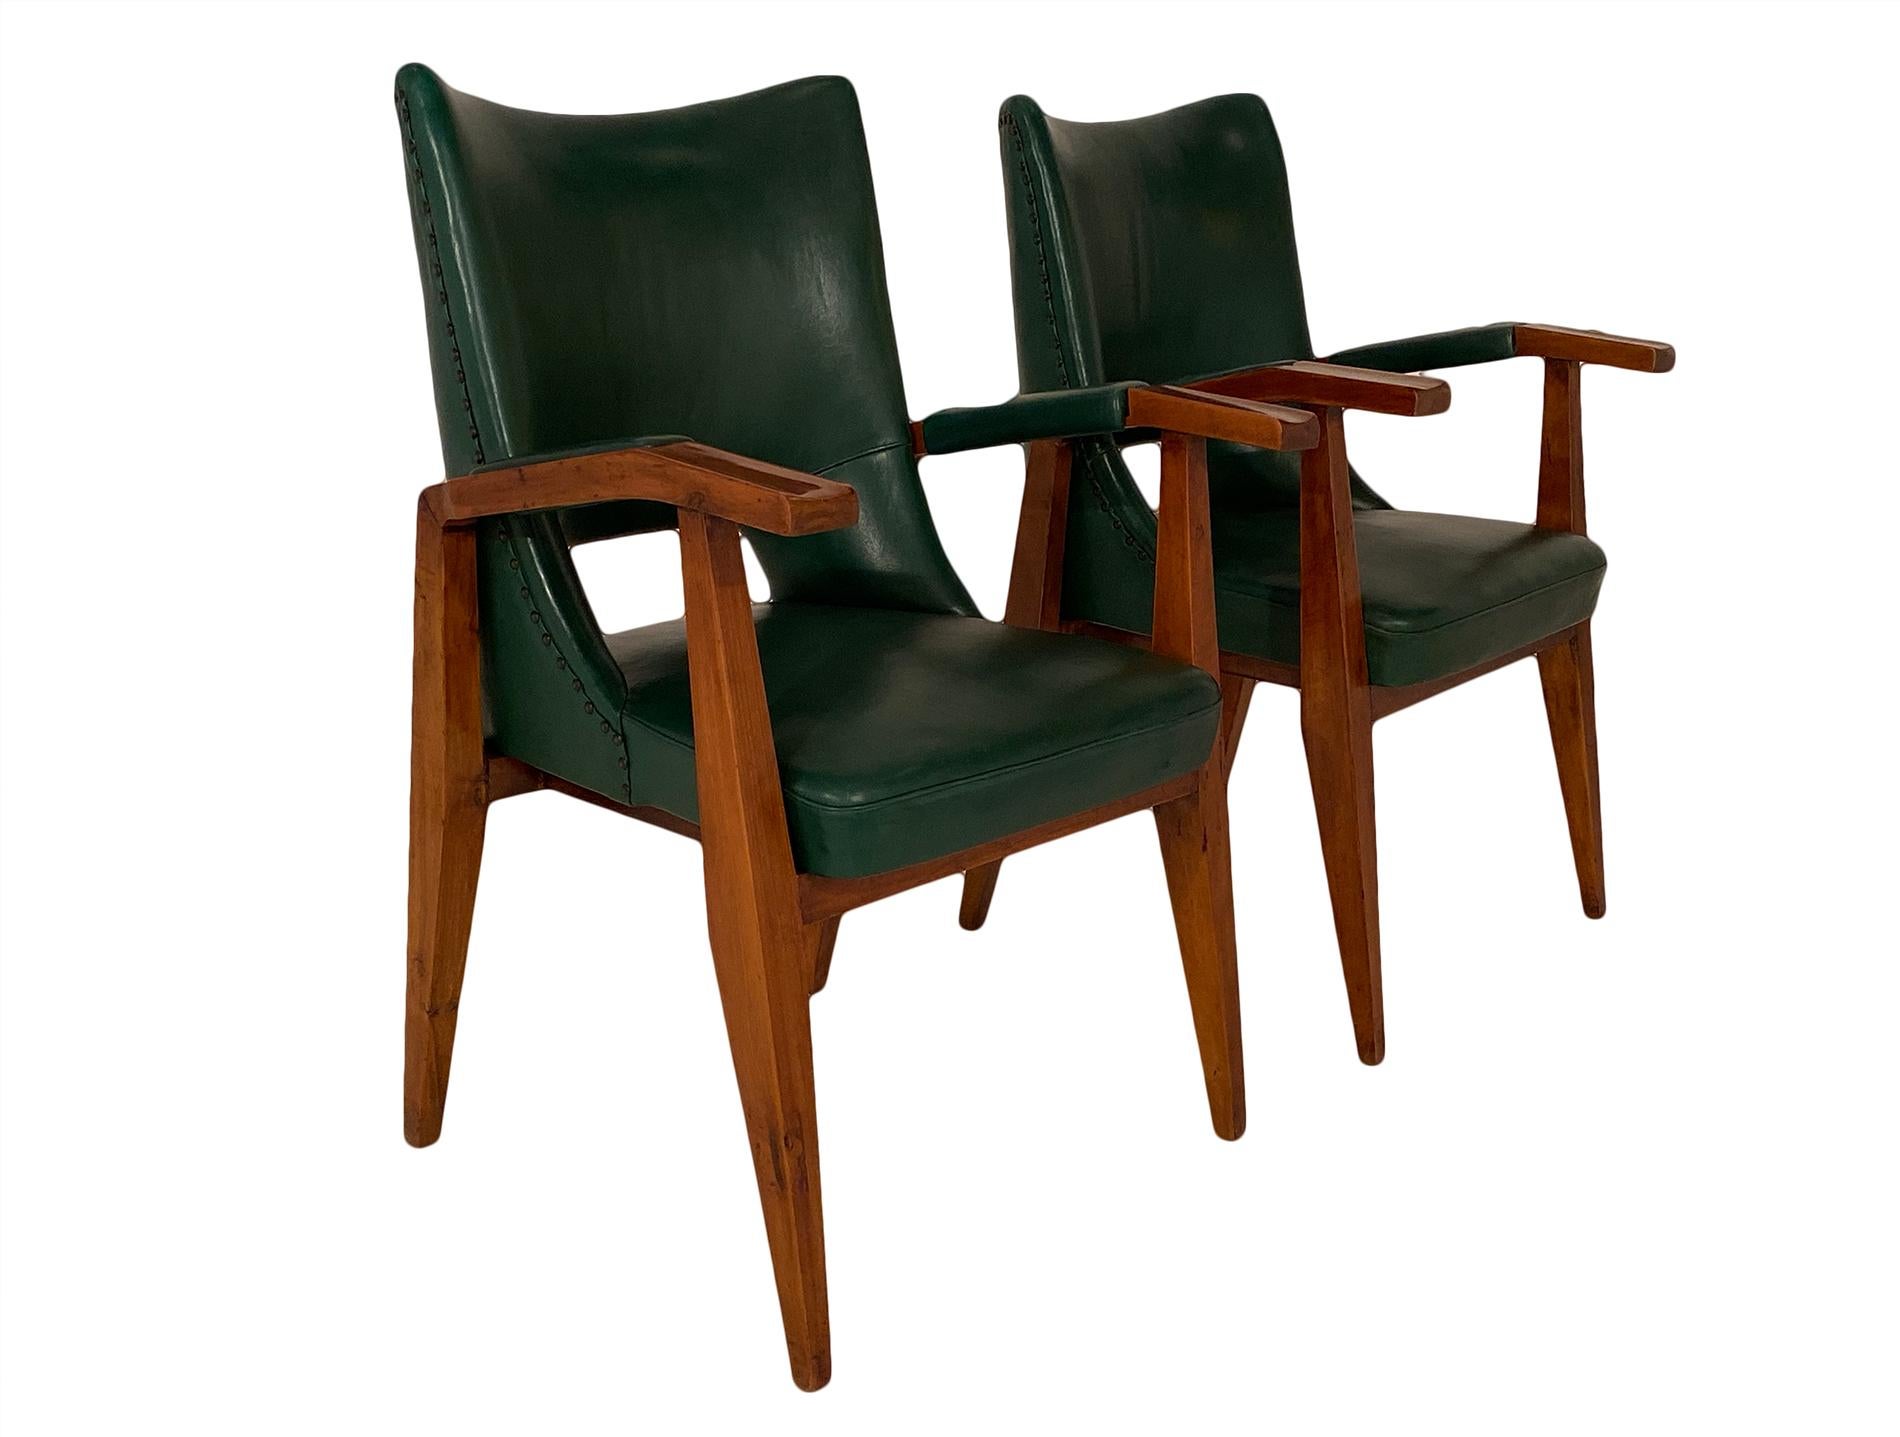 Pair of armchairs by Mario Gottardi for I.S.A. This Italian pair is made with a solid cherry wood frame and the original leather green hide in excellent condition. They are quite strong and comfortable.